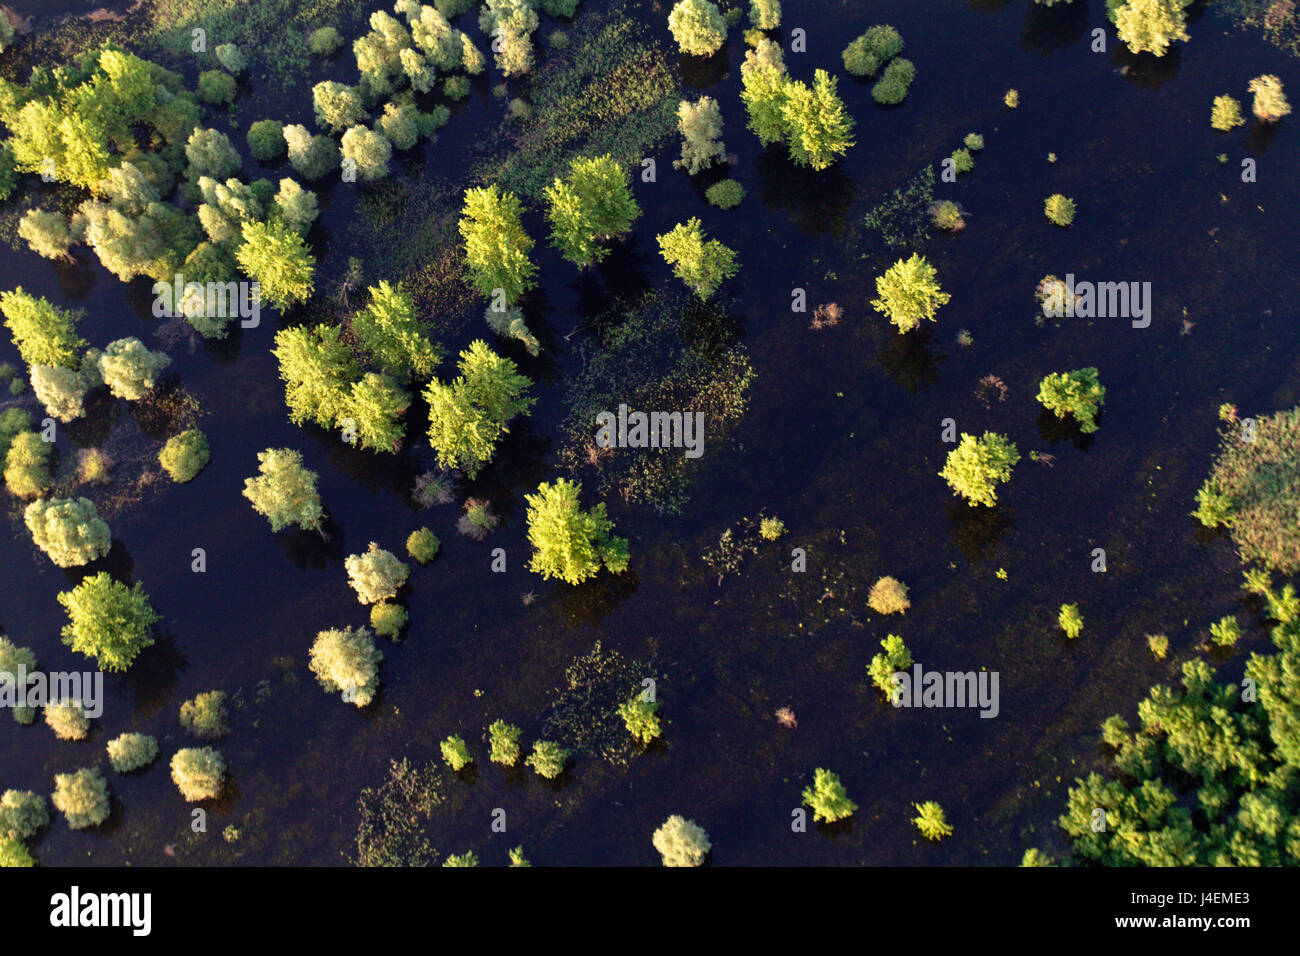 Aerial view of the reeds and willows during the flood in Kopacki rit Nature Park, Croatia Stock Photo